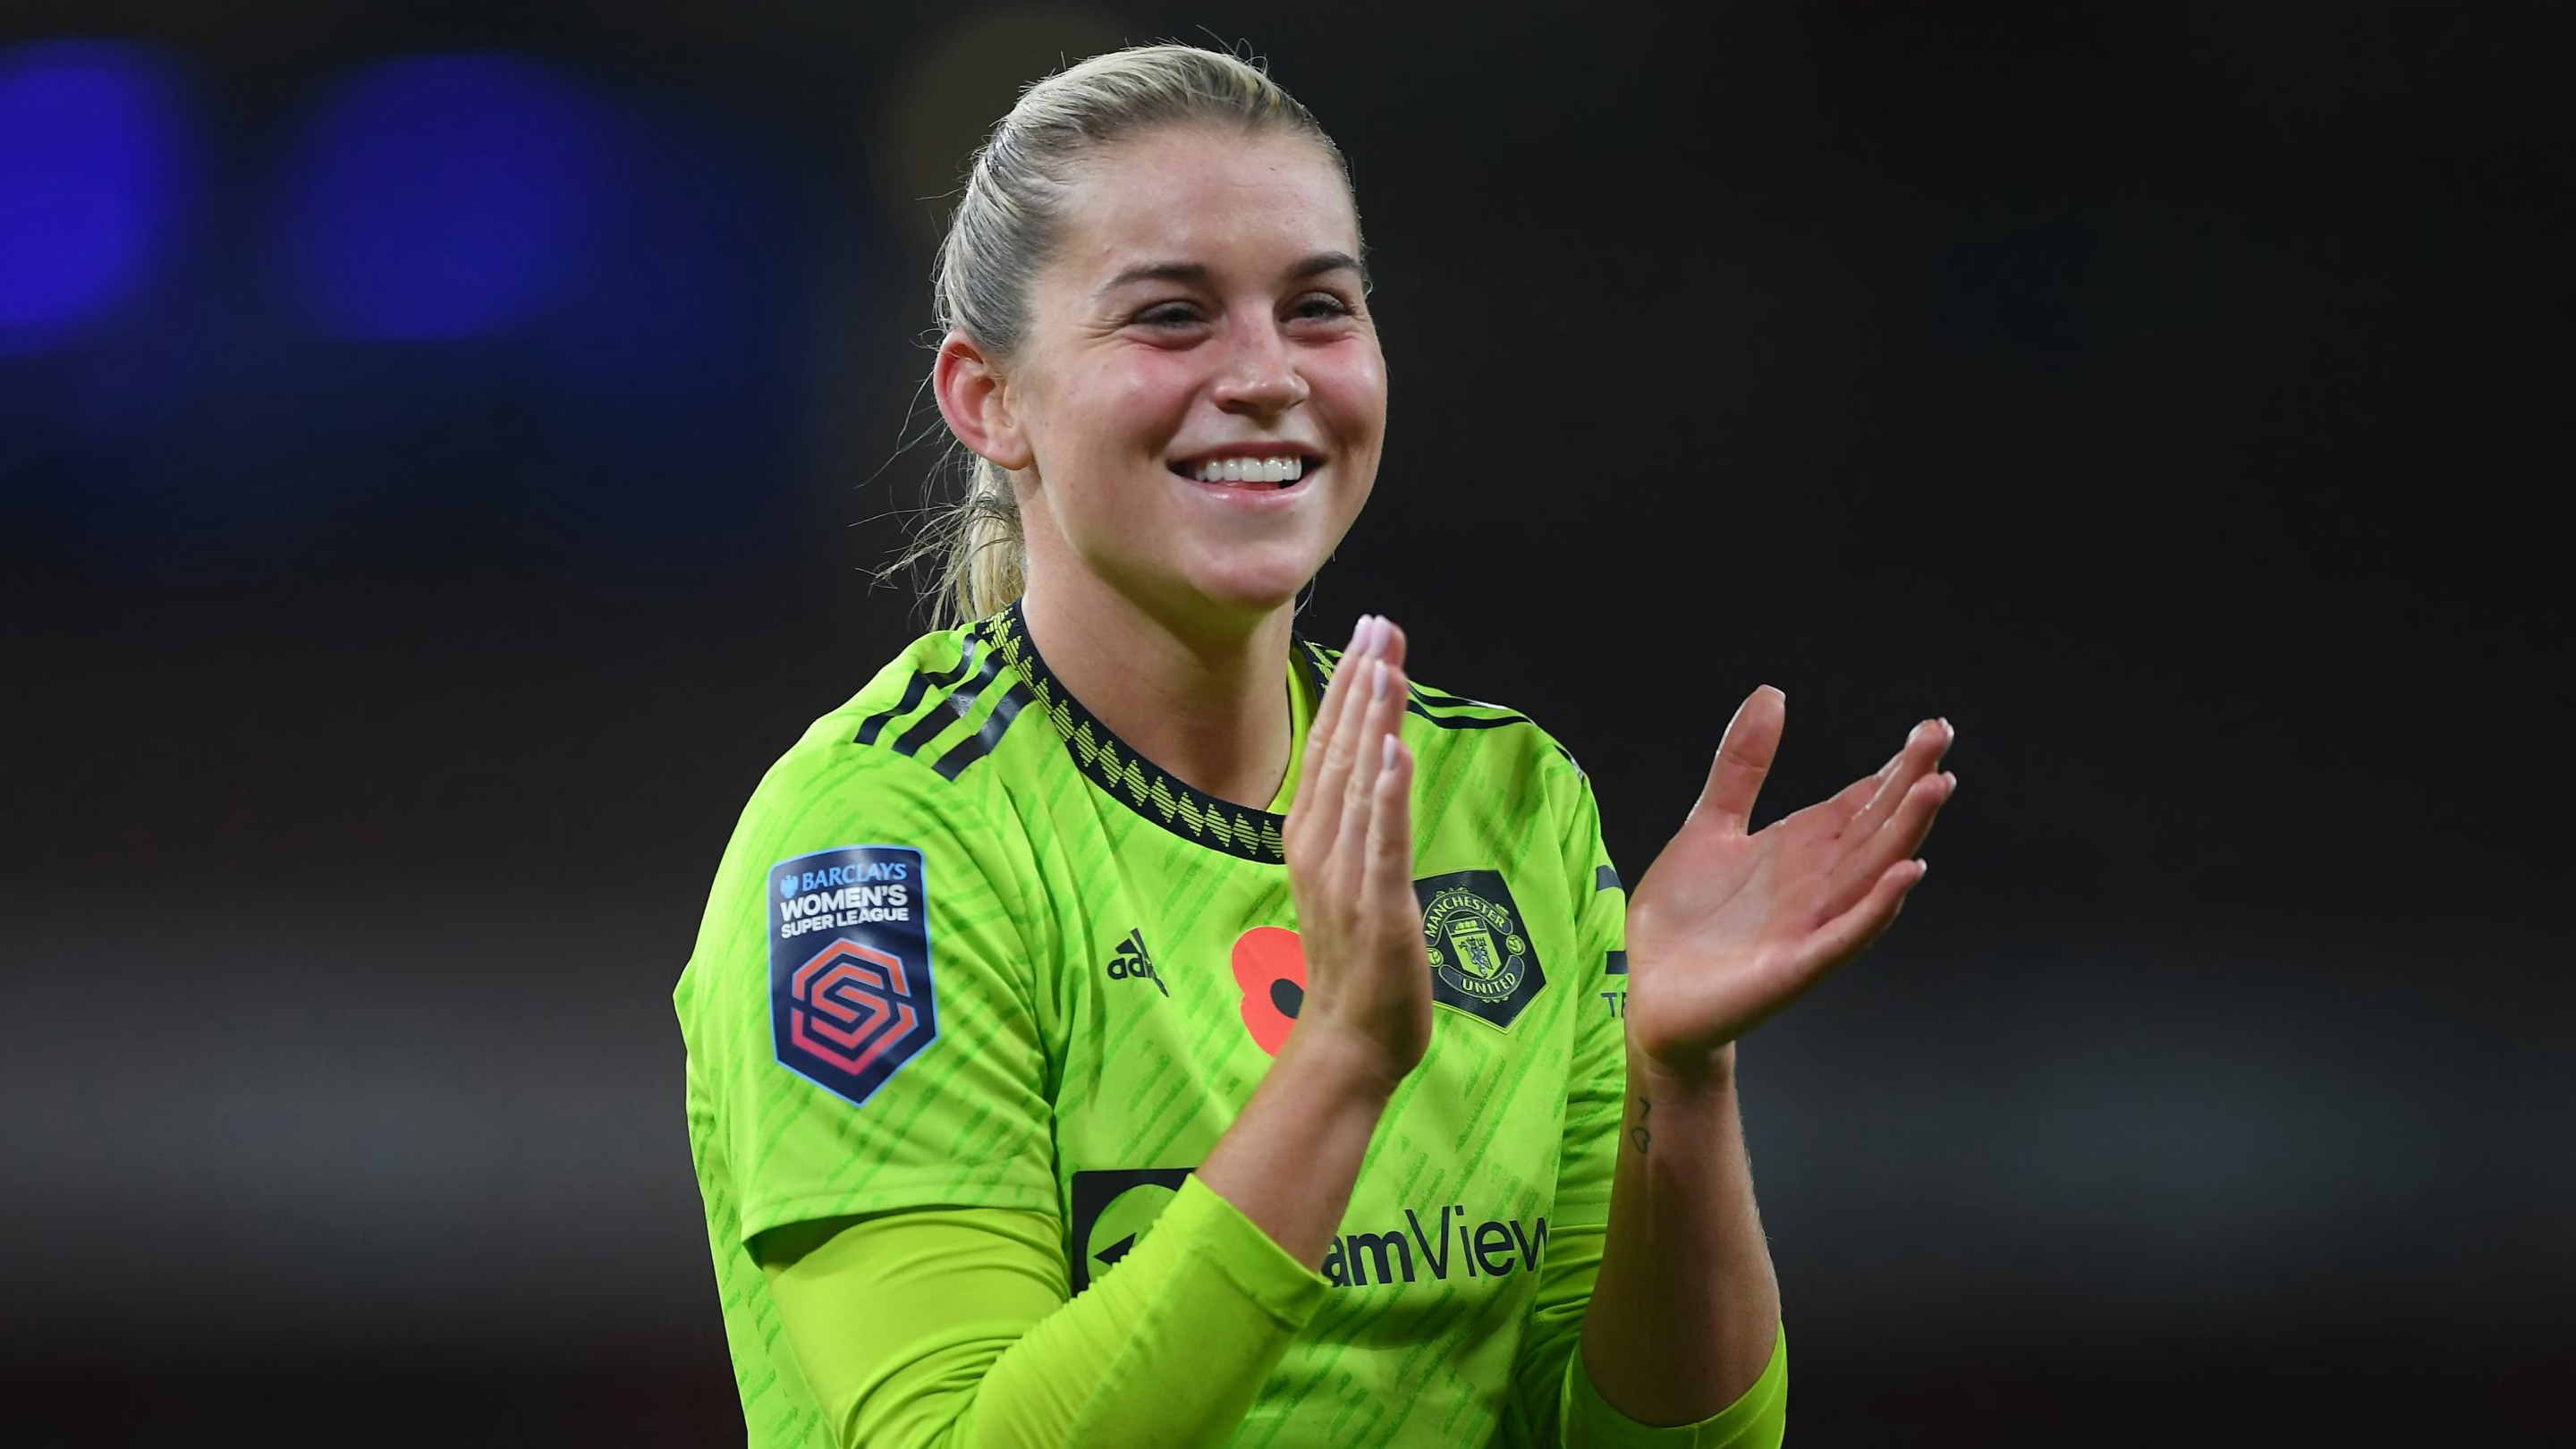 Arsenal sign Alessia Russo on free transfer after Man Utd exit